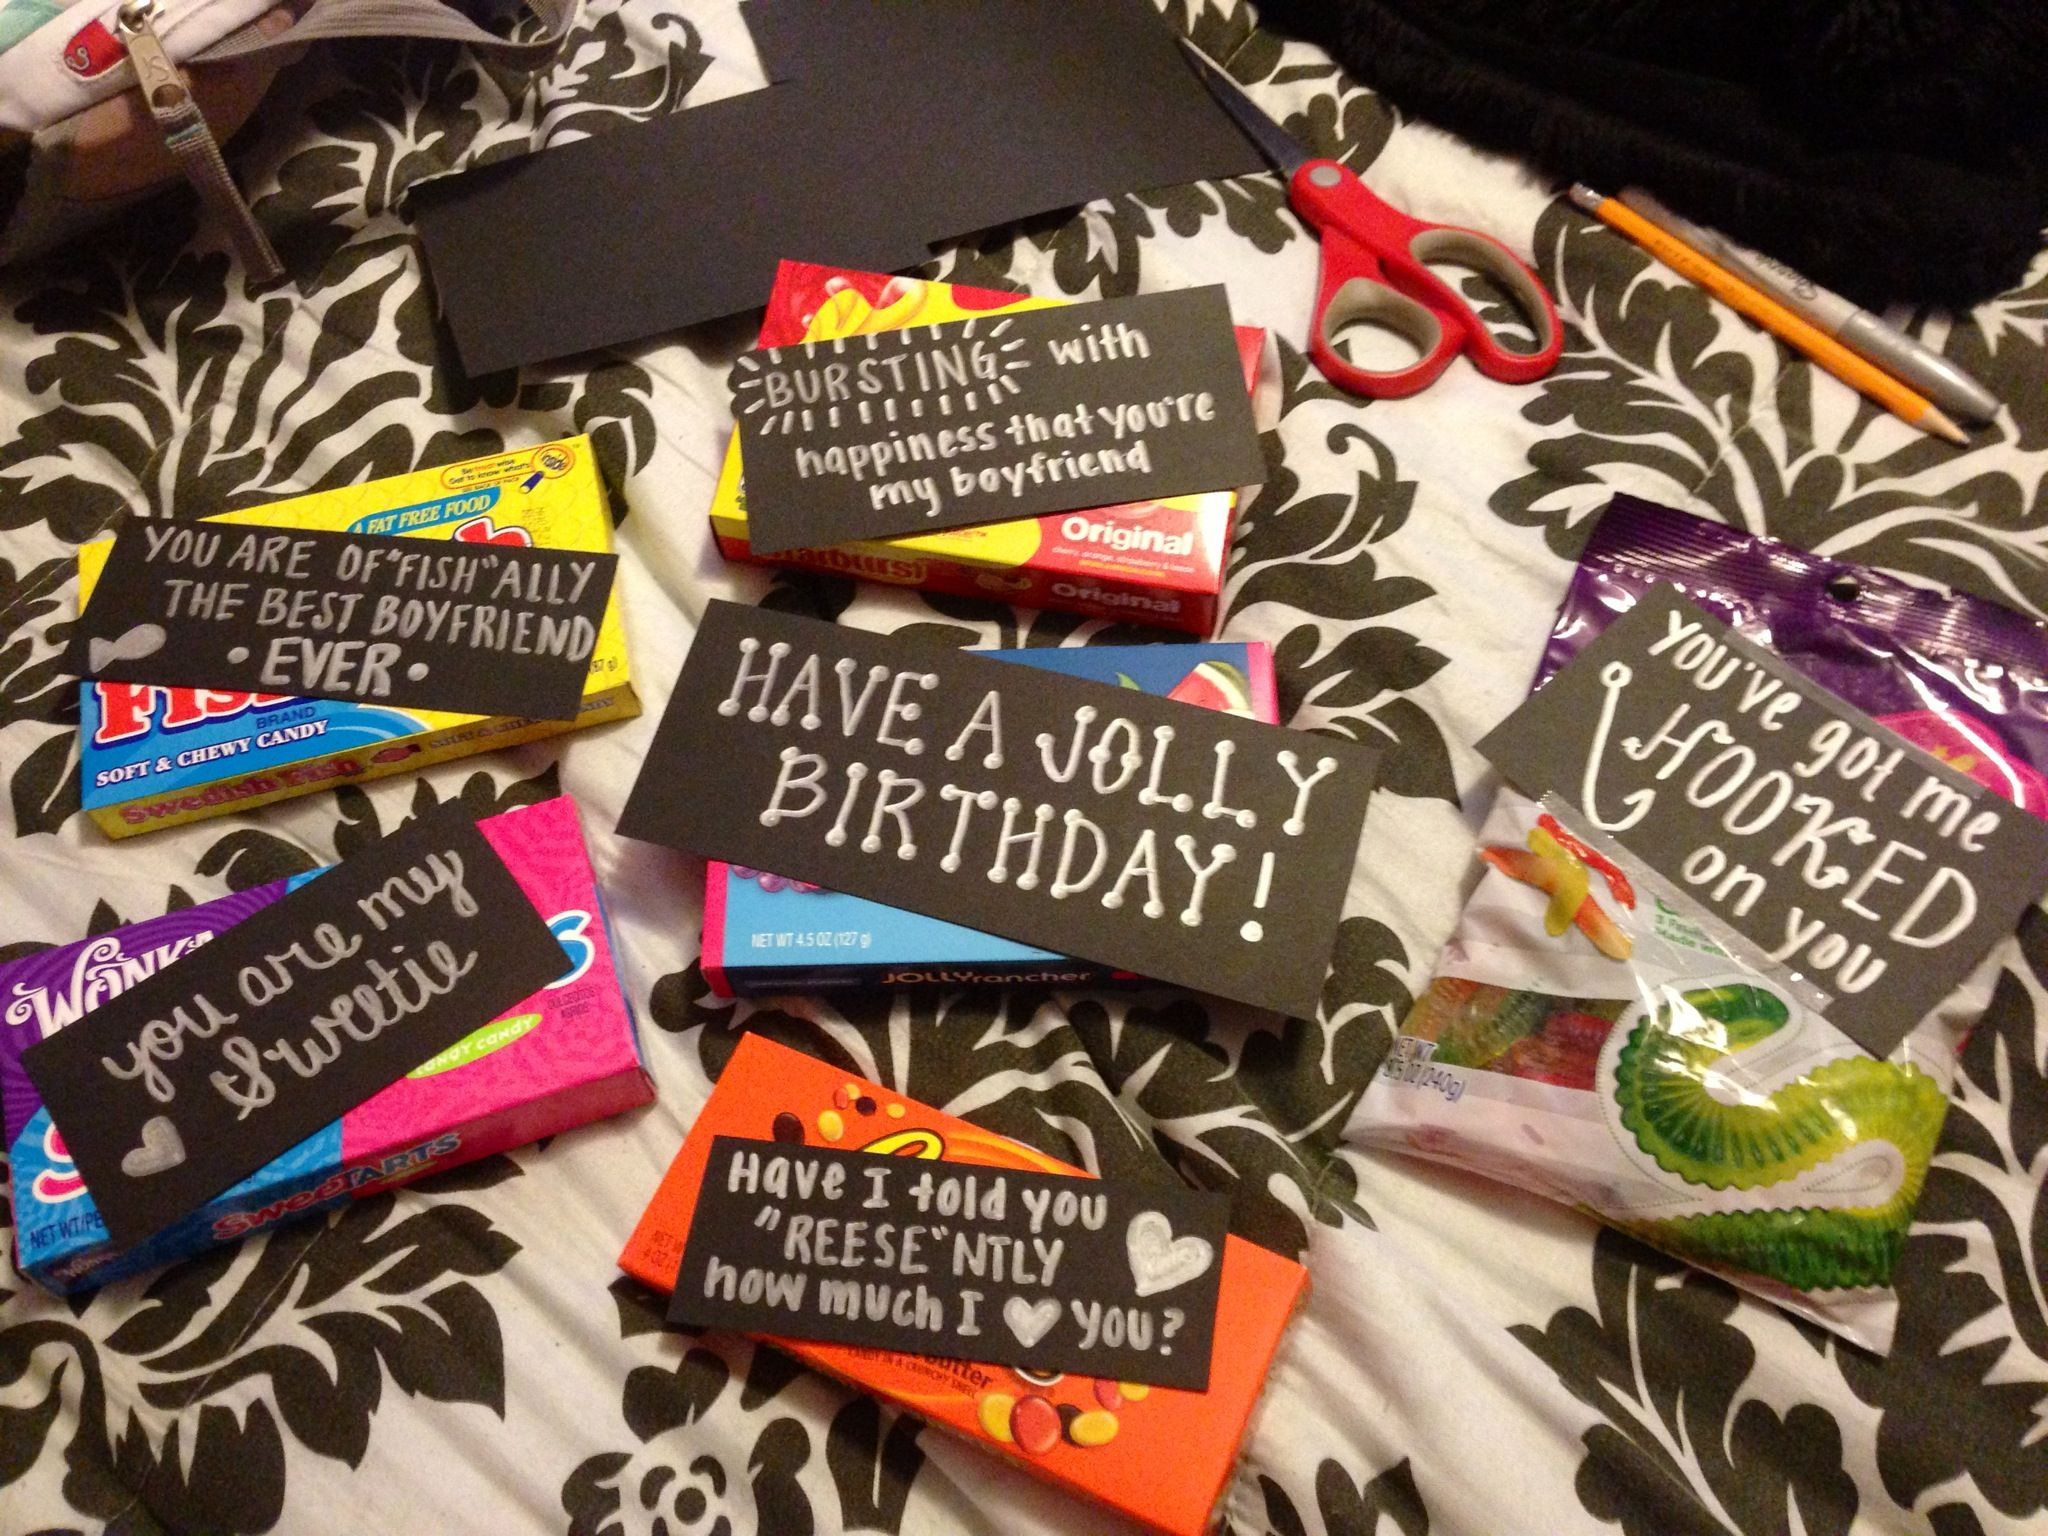 Candy Gift Ideas For Boyfriend
 Candy sayings